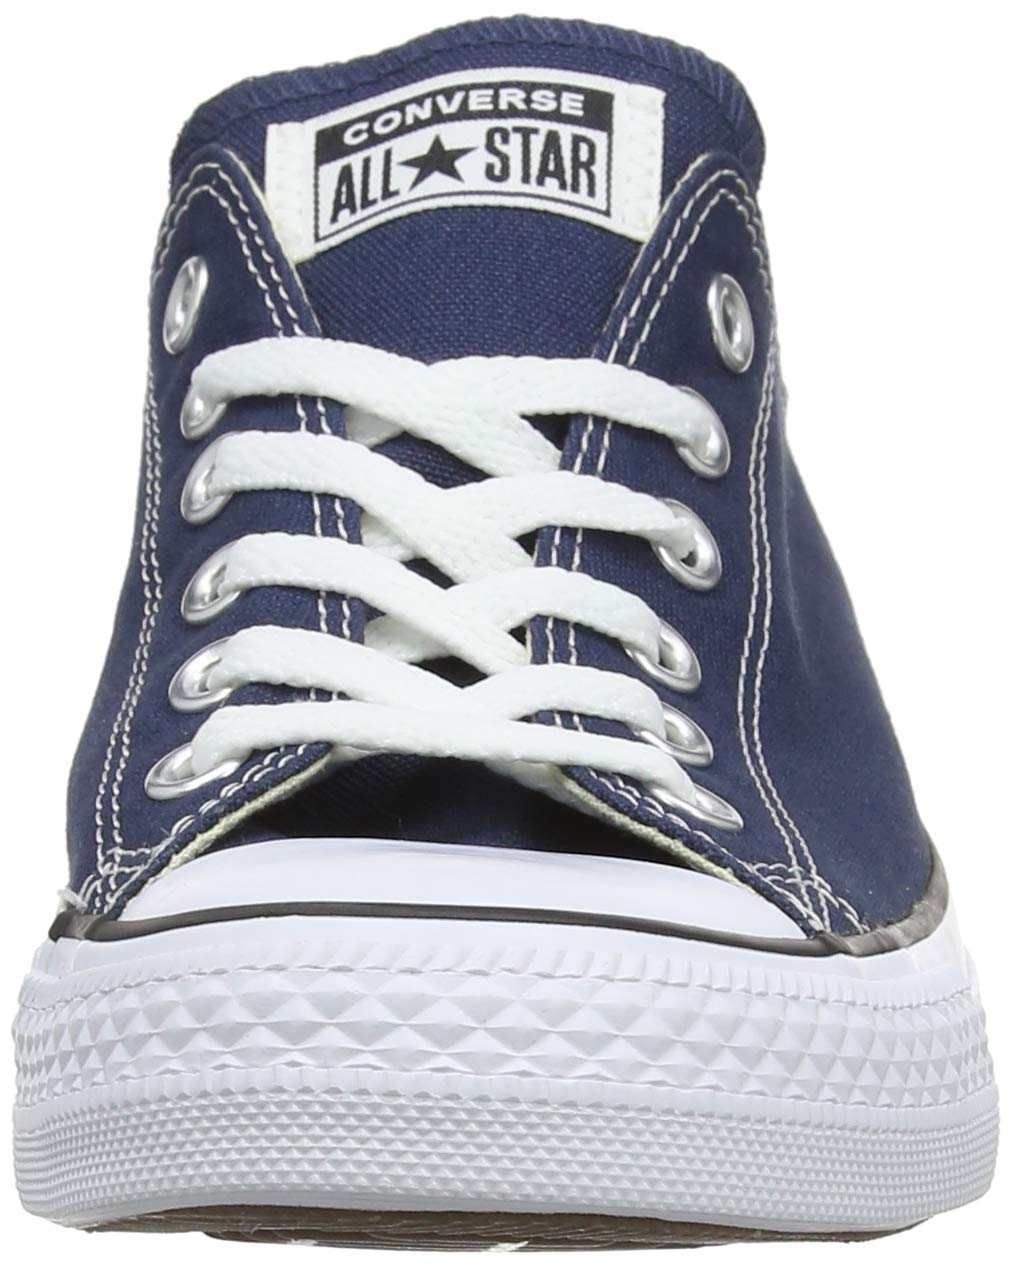 Converse All Star Ox Sneakers - image 4 of 15